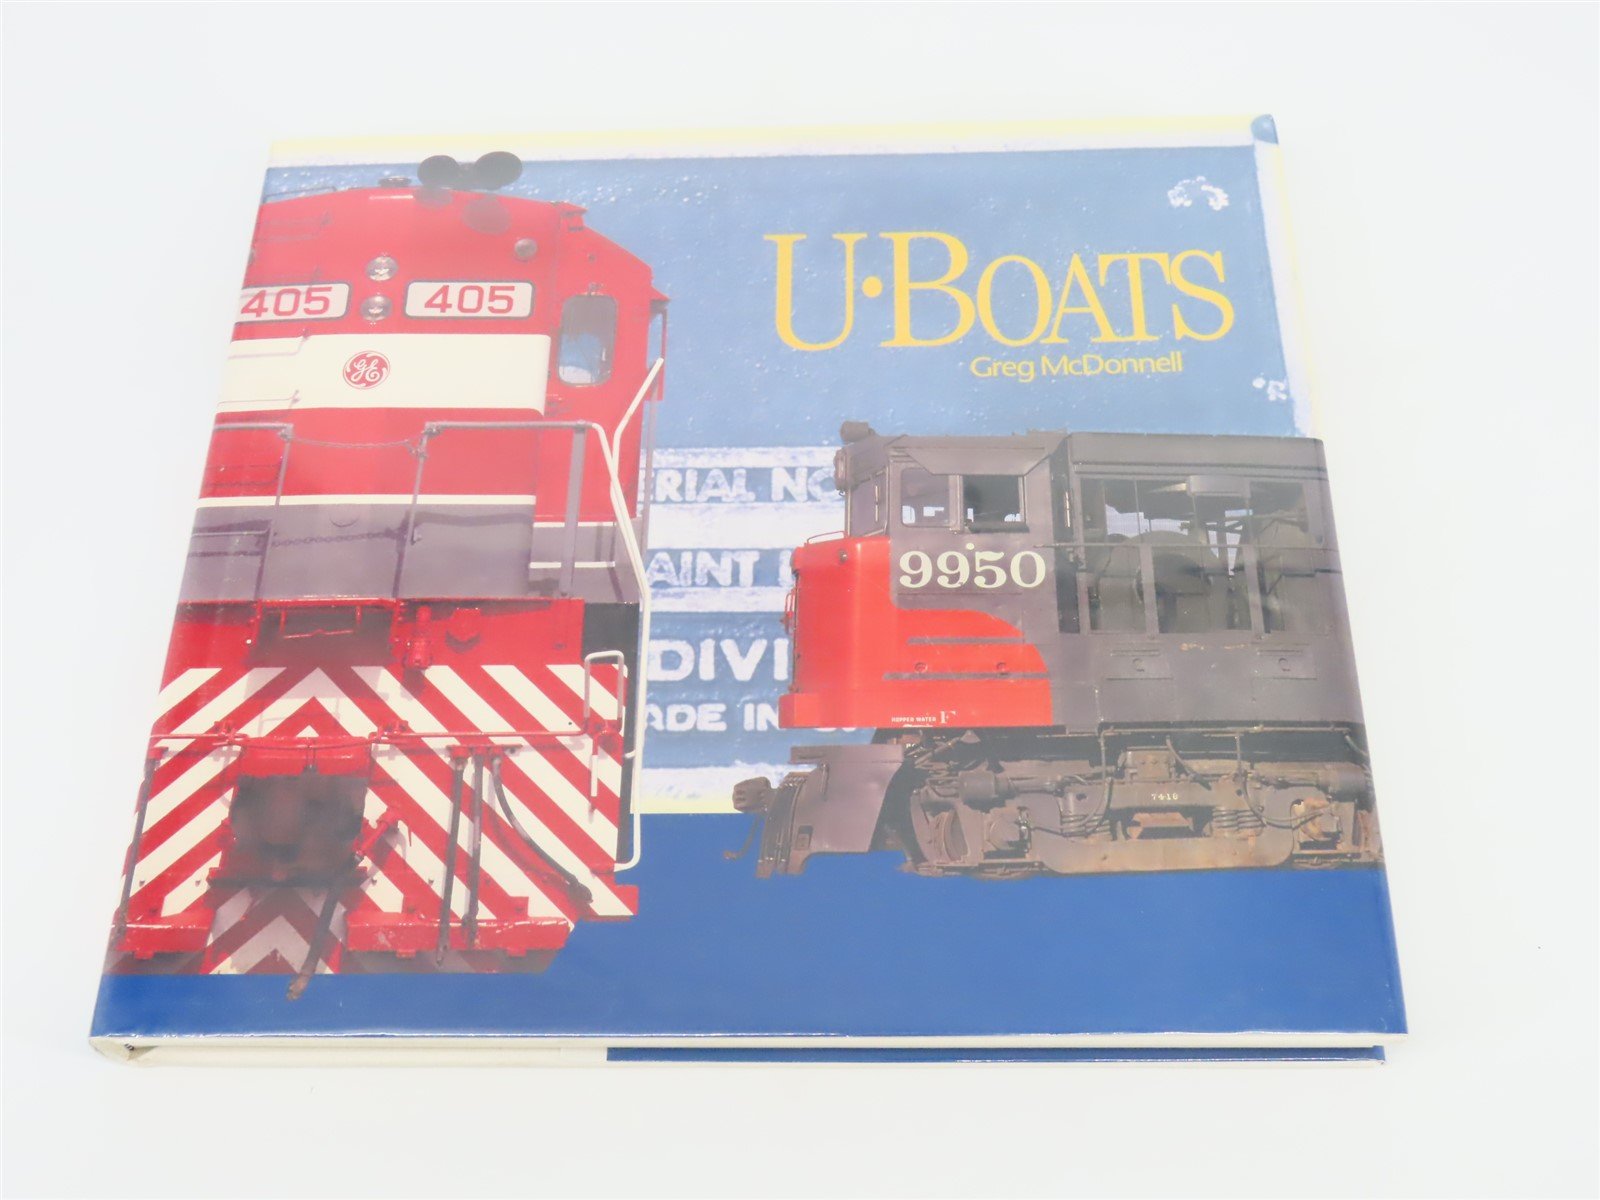 U-Boats by Greg McDonnell ©1994 HC Book